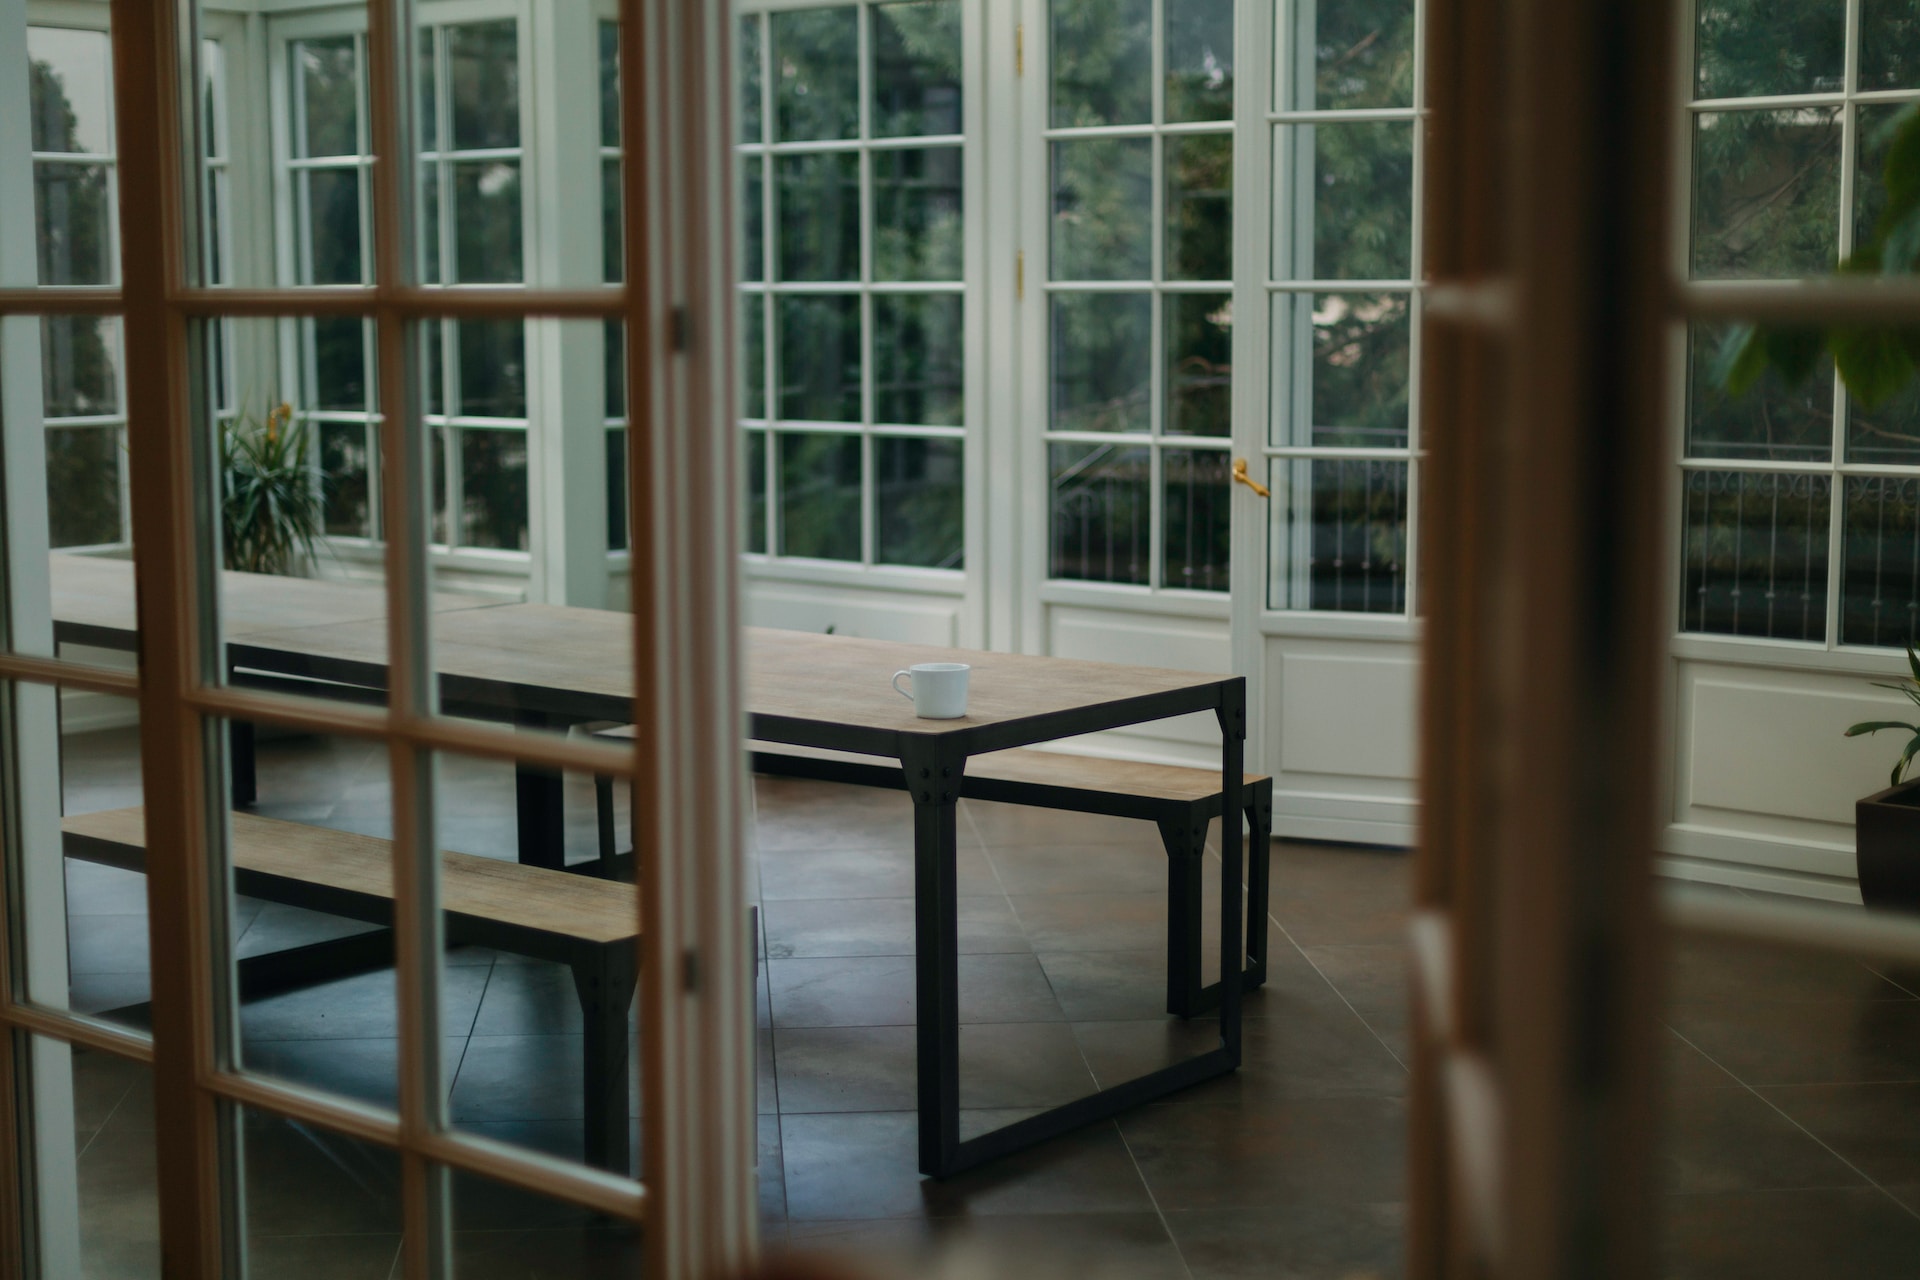 Common Problems with Conservatories